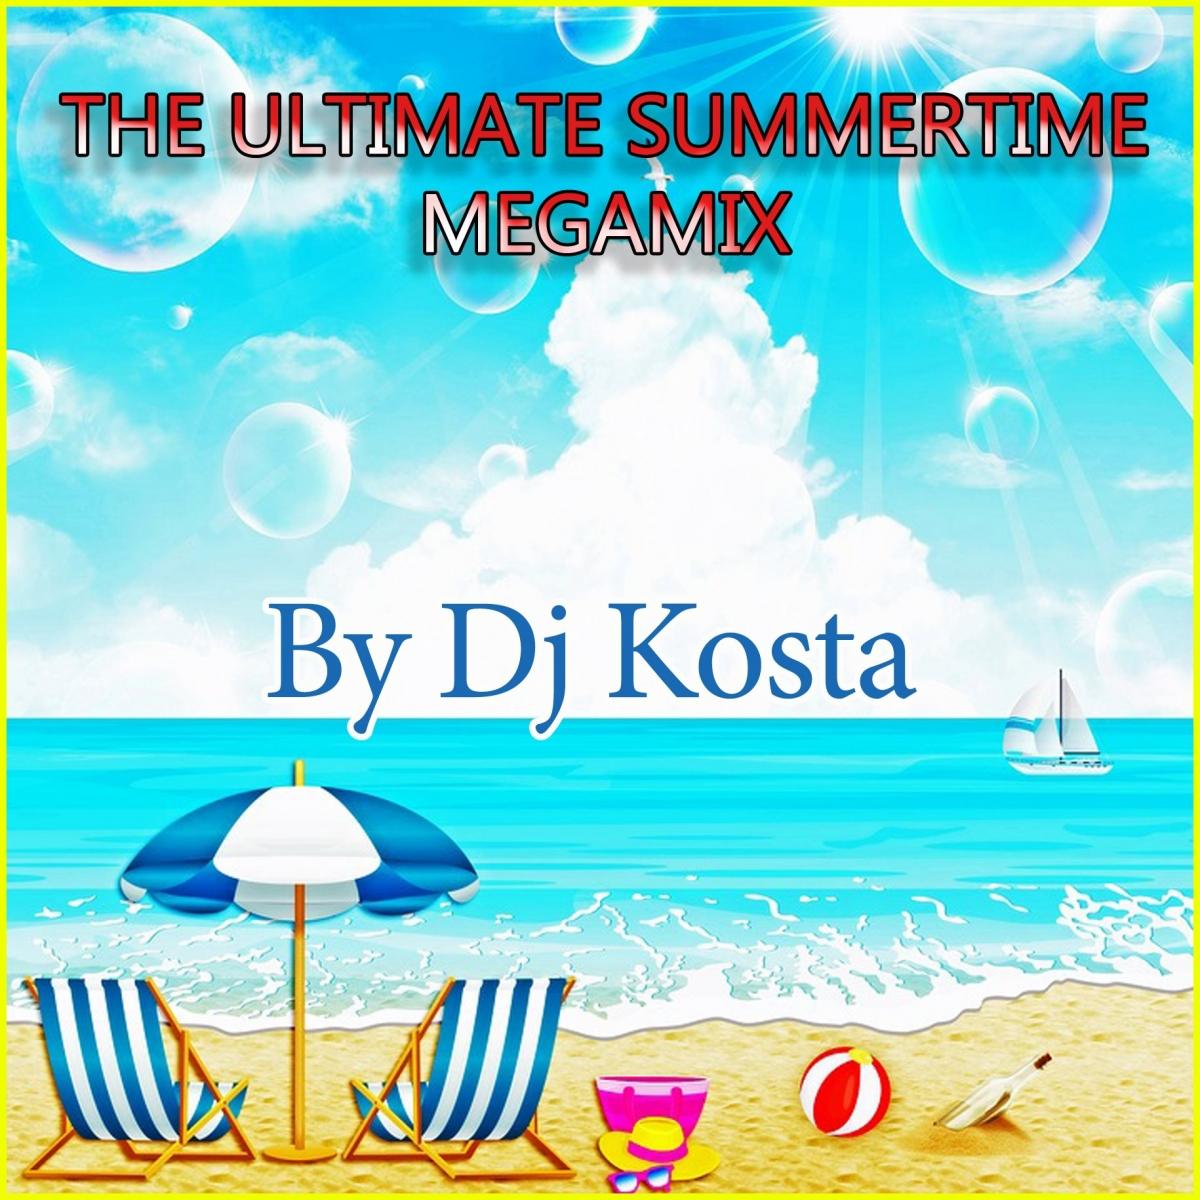 The Ultimate Summertime Megamix